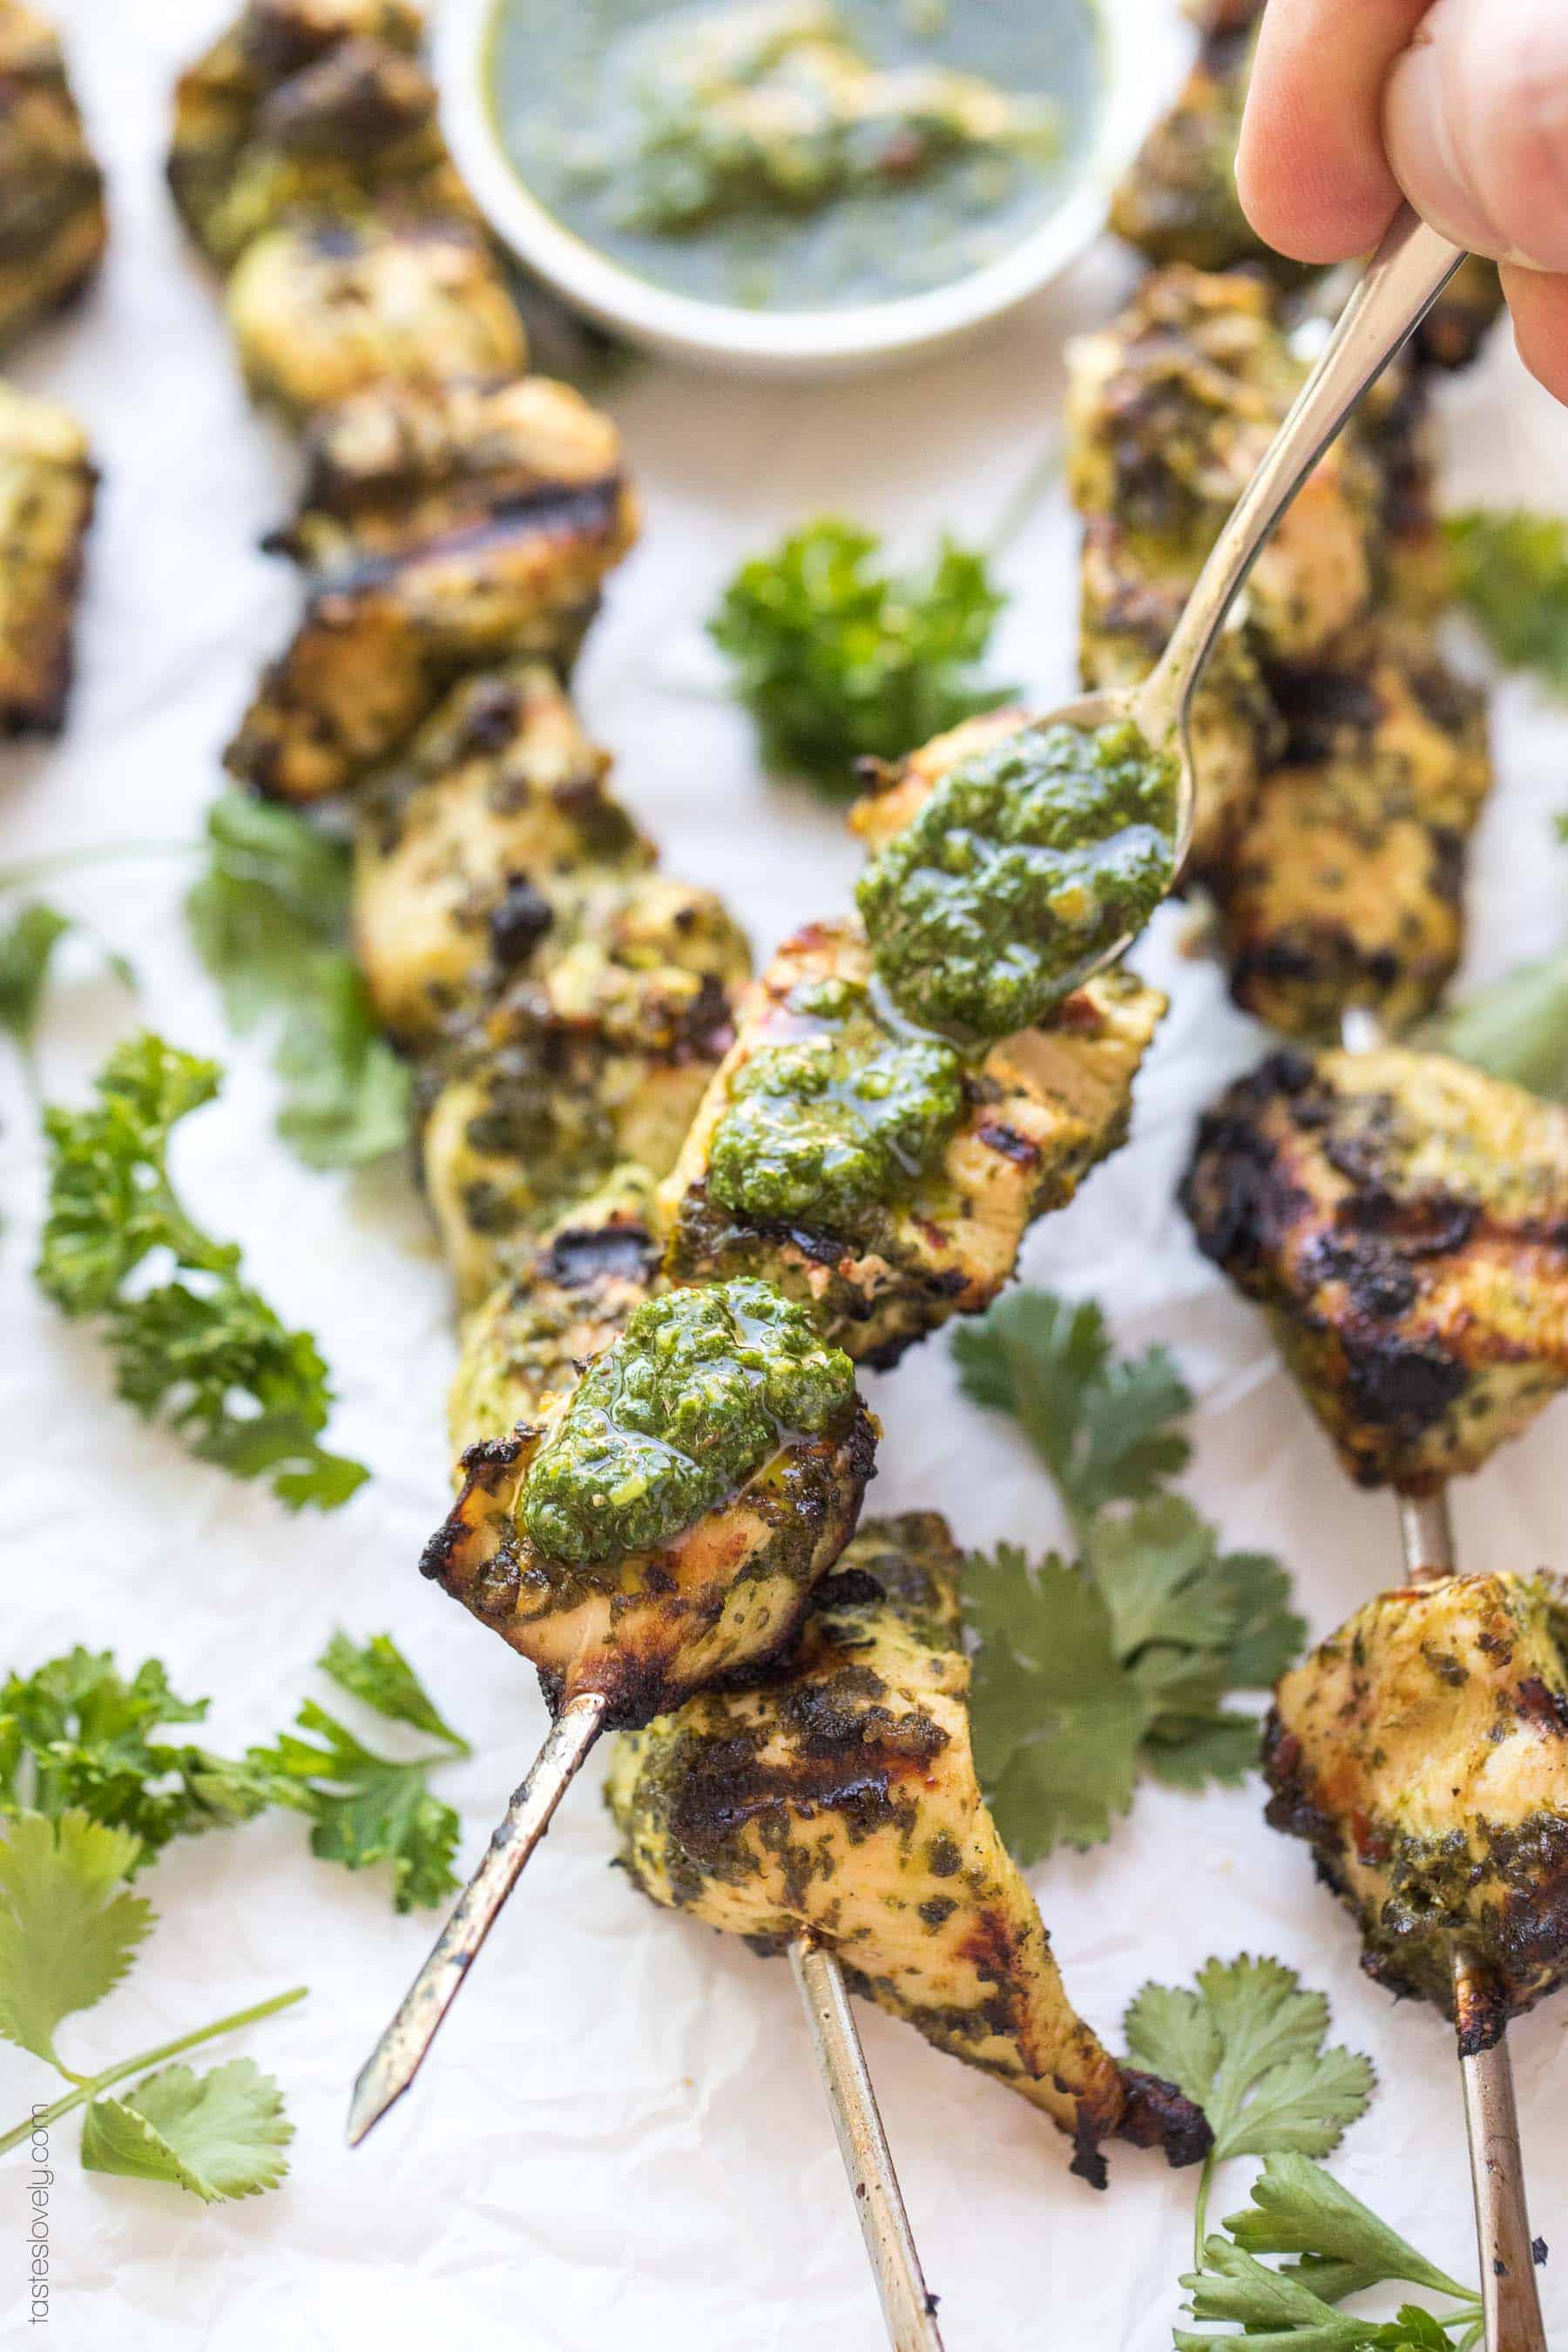 Paleo + Whole30 Chimichurri Chicken Skewers - a delicious and healthy 30 minute chicken kebab recipe! #paleo #whole30 #glutenfree #grainfree #keto #dairyfree #sugarfree #cleaneating #realfood